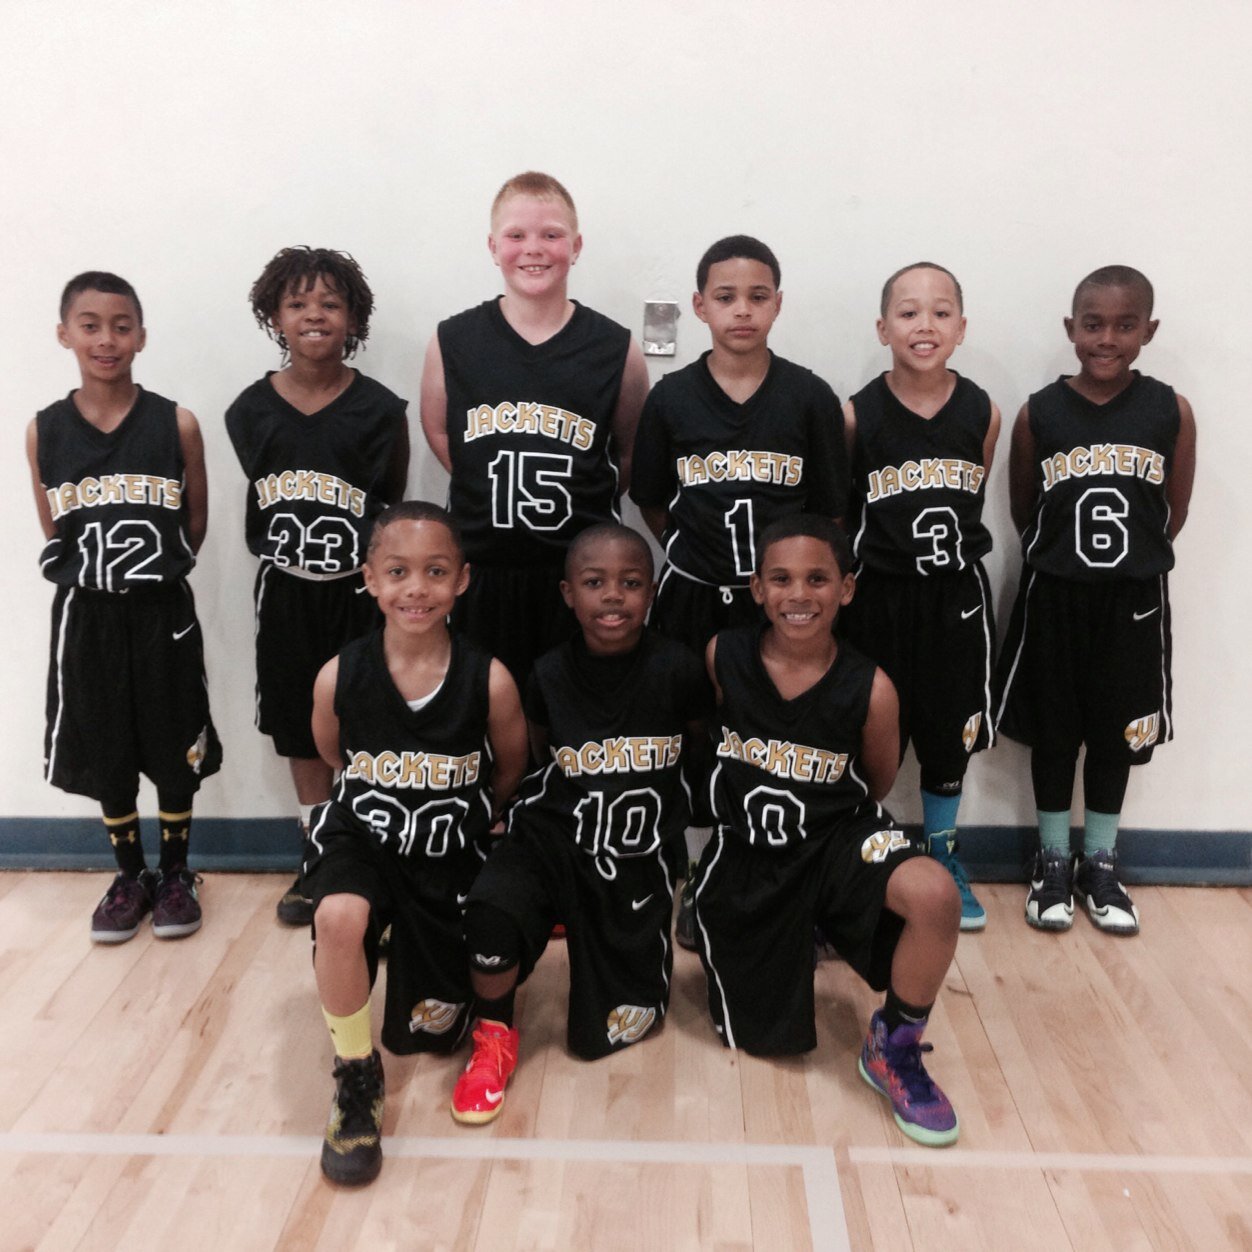 We are the Yellow Jackets' organizations c/o 2024 team ready to take the West Coast by storm. #wegotnext